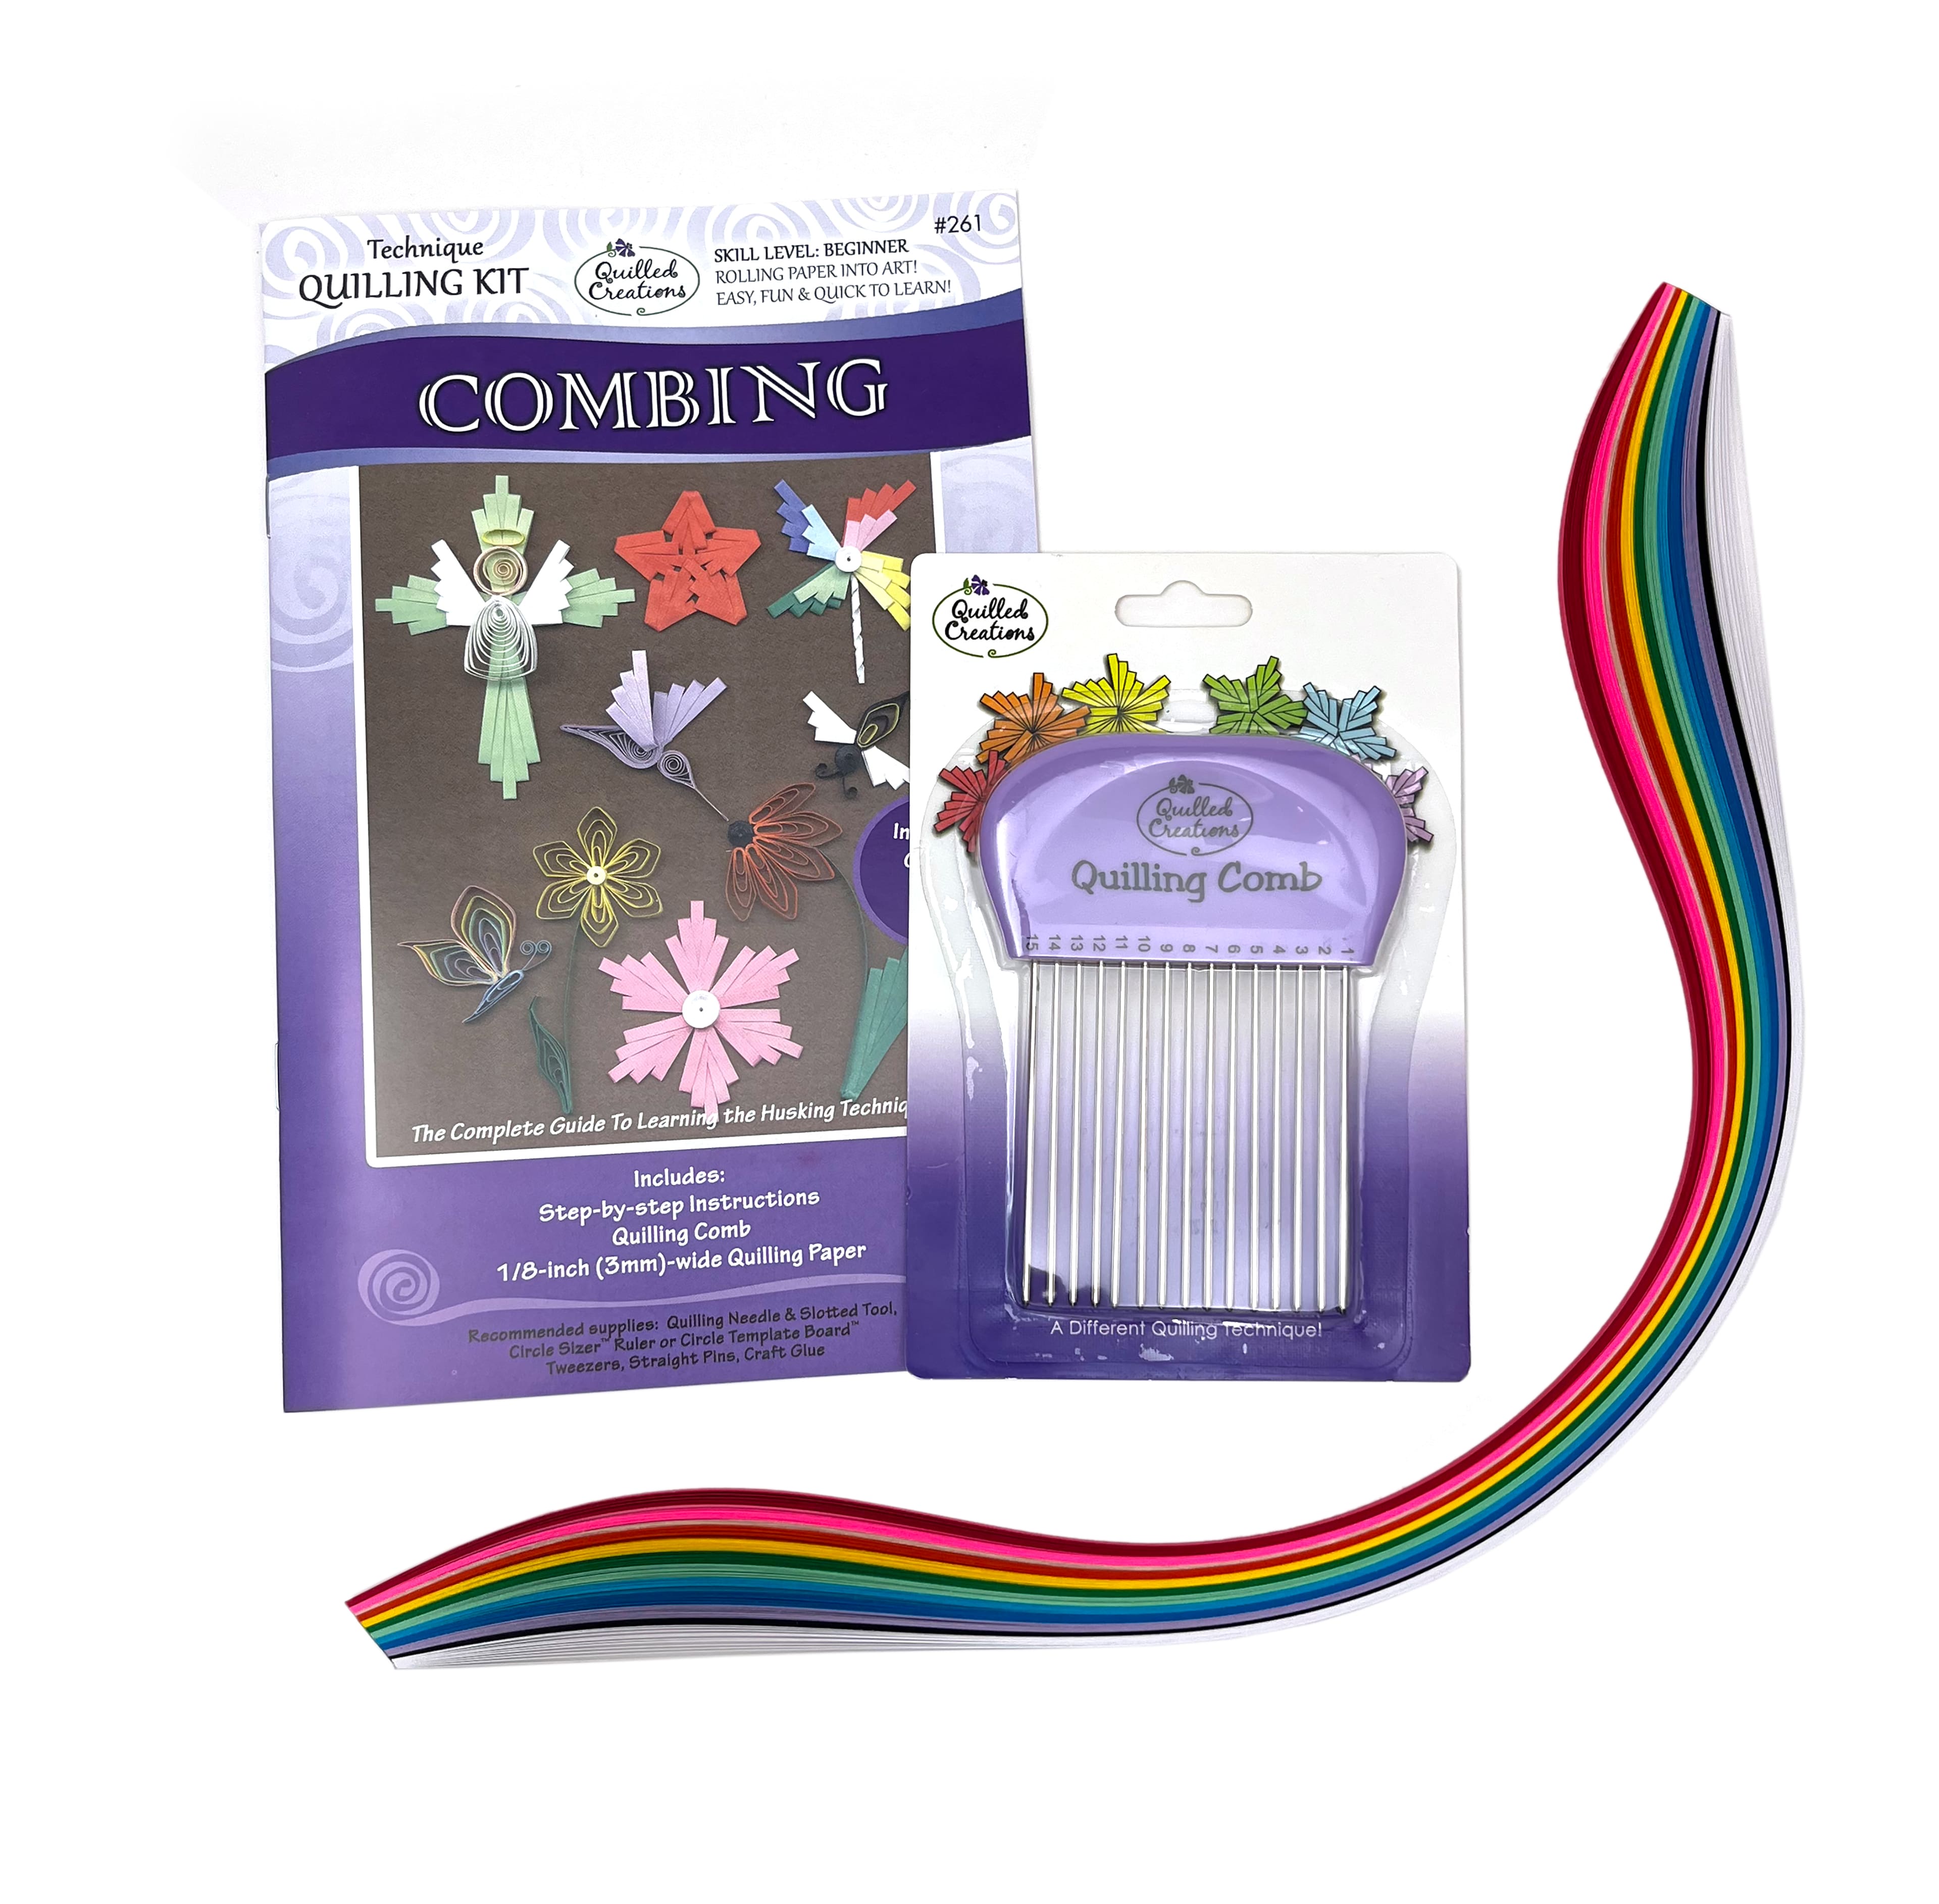 Quilled Creations&#x2122; Combing Technique Quilling Kit